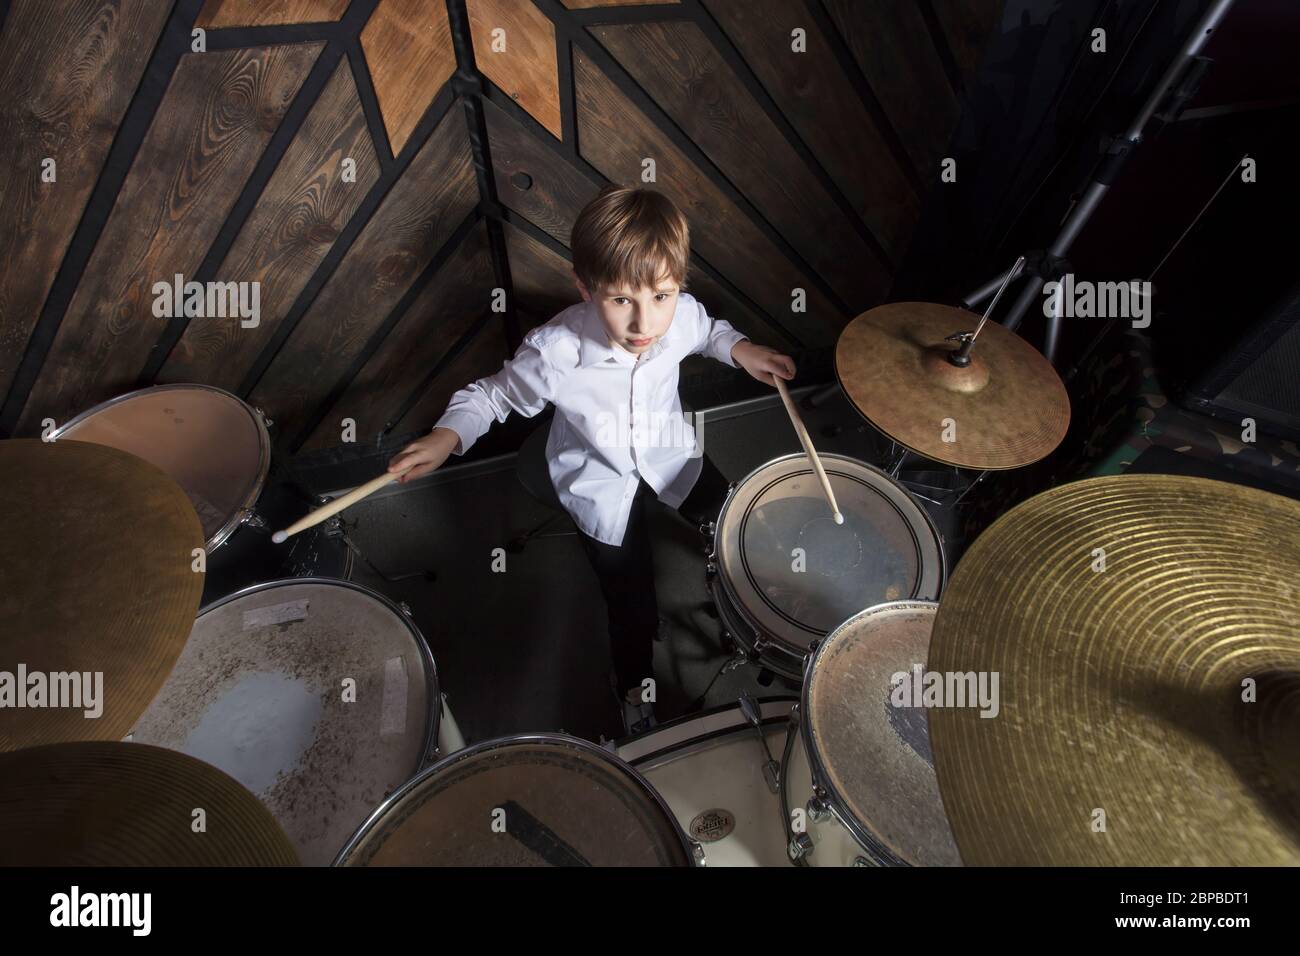 The boy learns to play the drums. The child behind the drum kit. Stock Photo